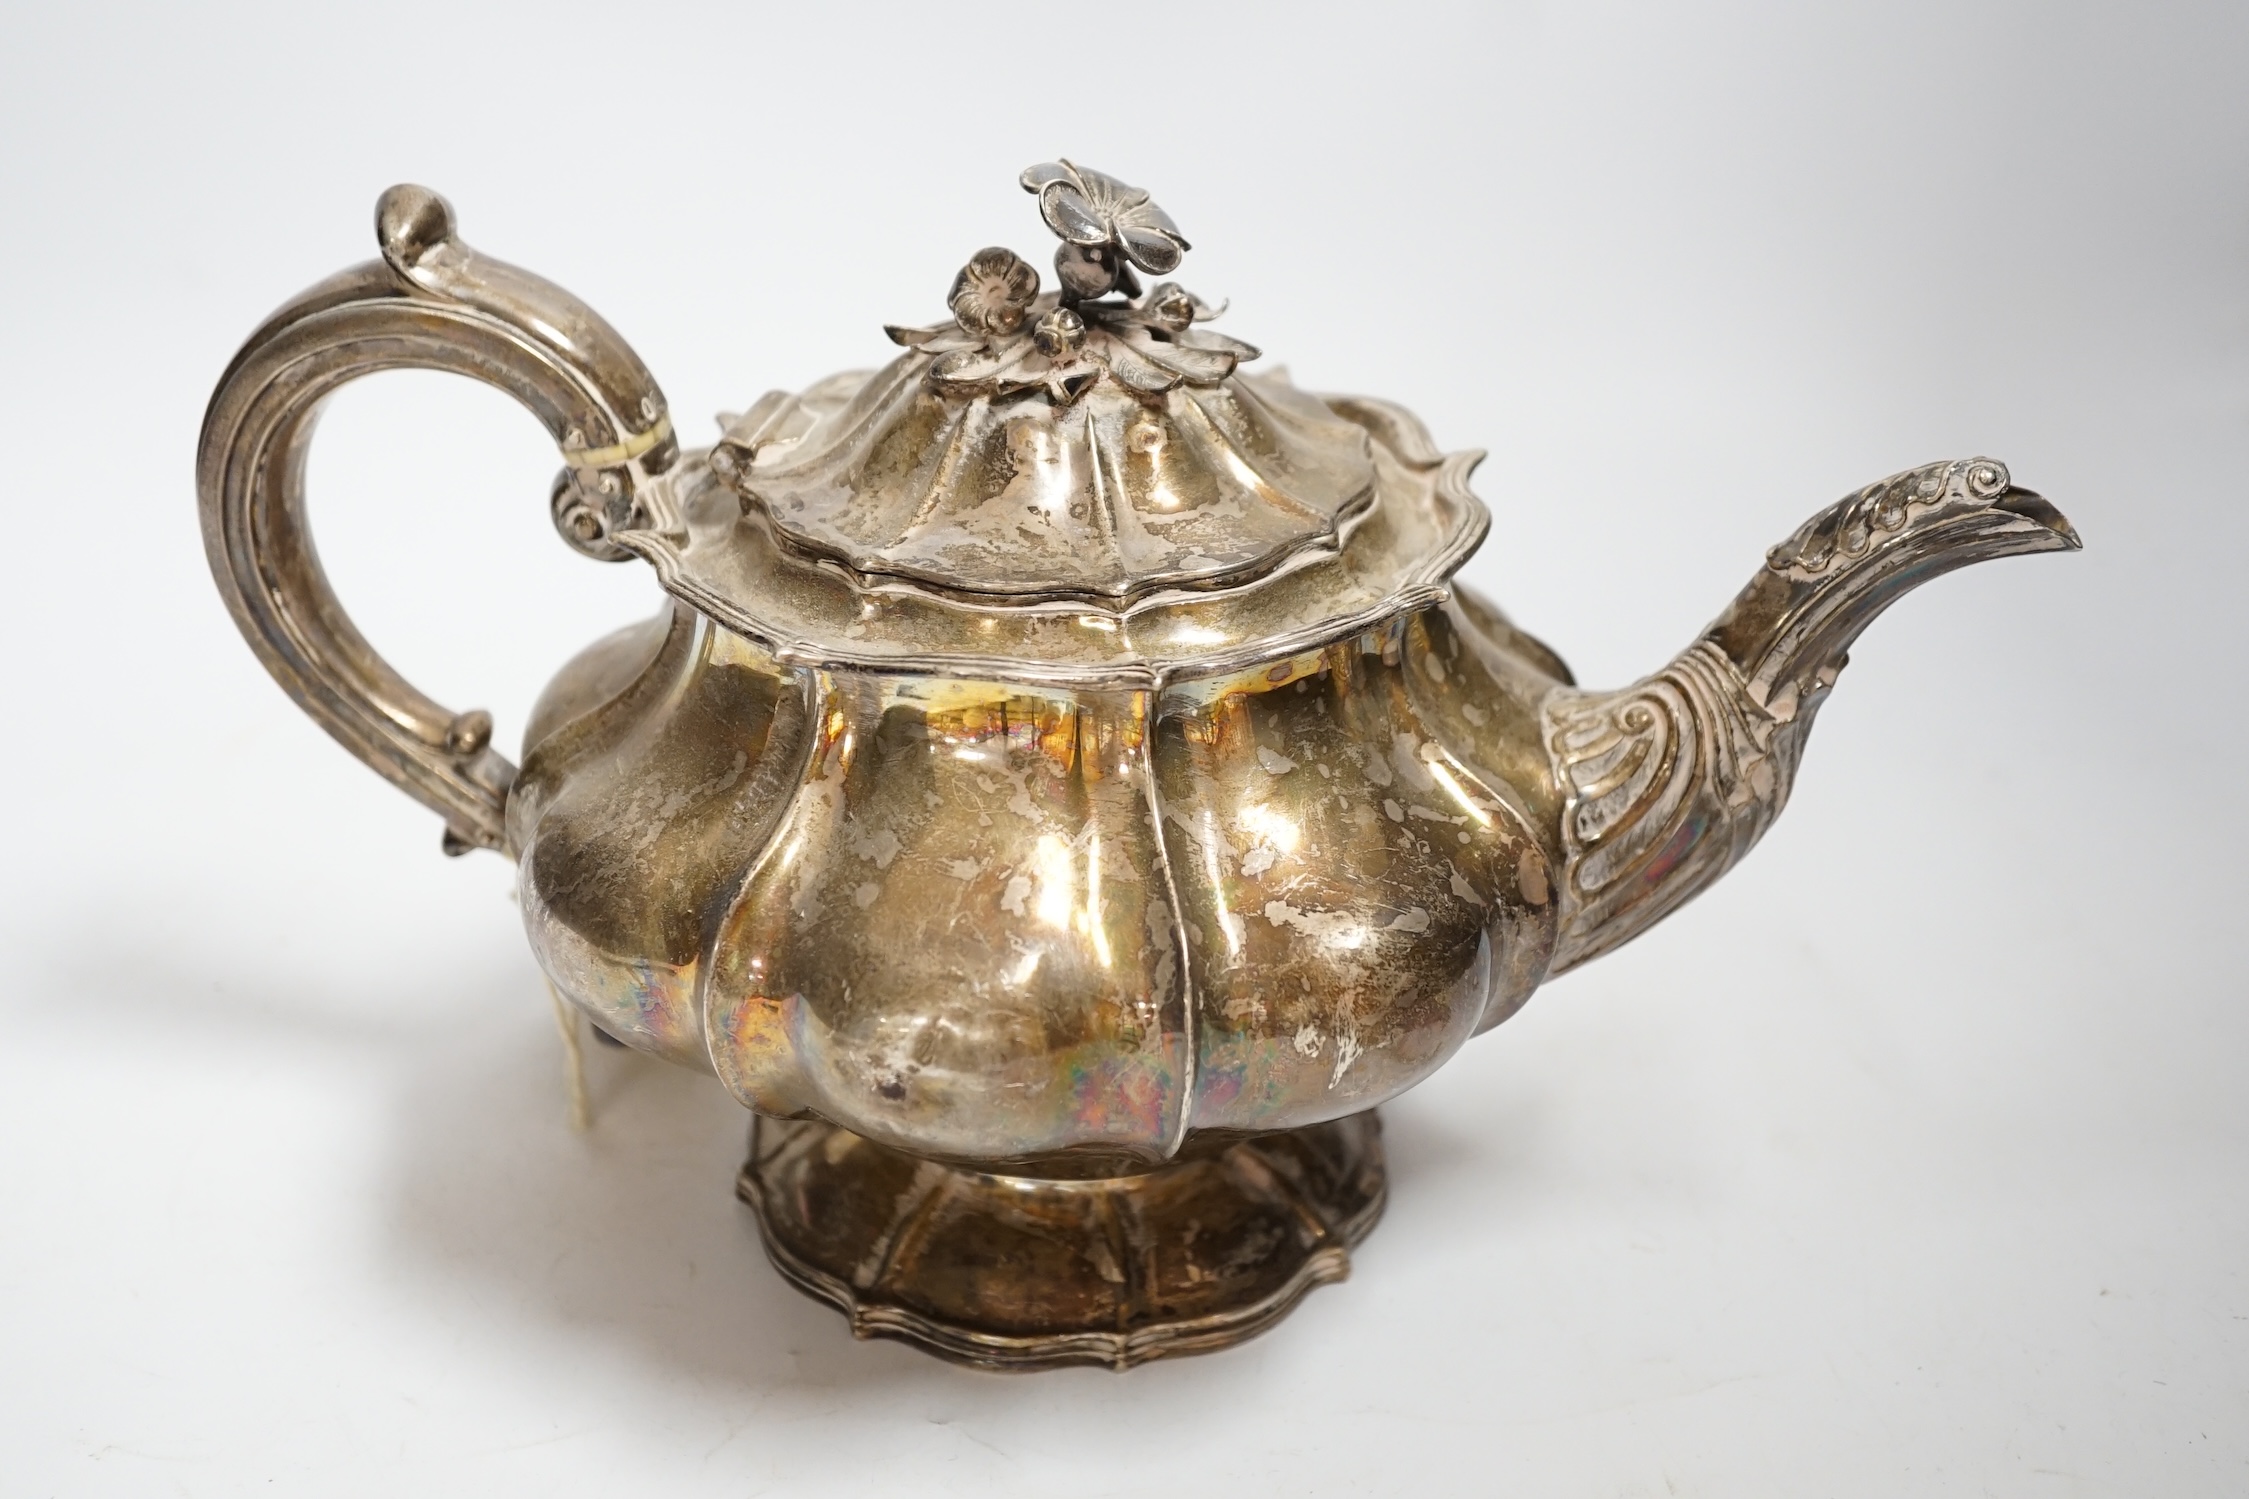 A William IV silver melon shaped pedestal teapot, Joseph Angell I, London, 1830, gross weight 24.3oz. CITES Submission reference 447Z42EV